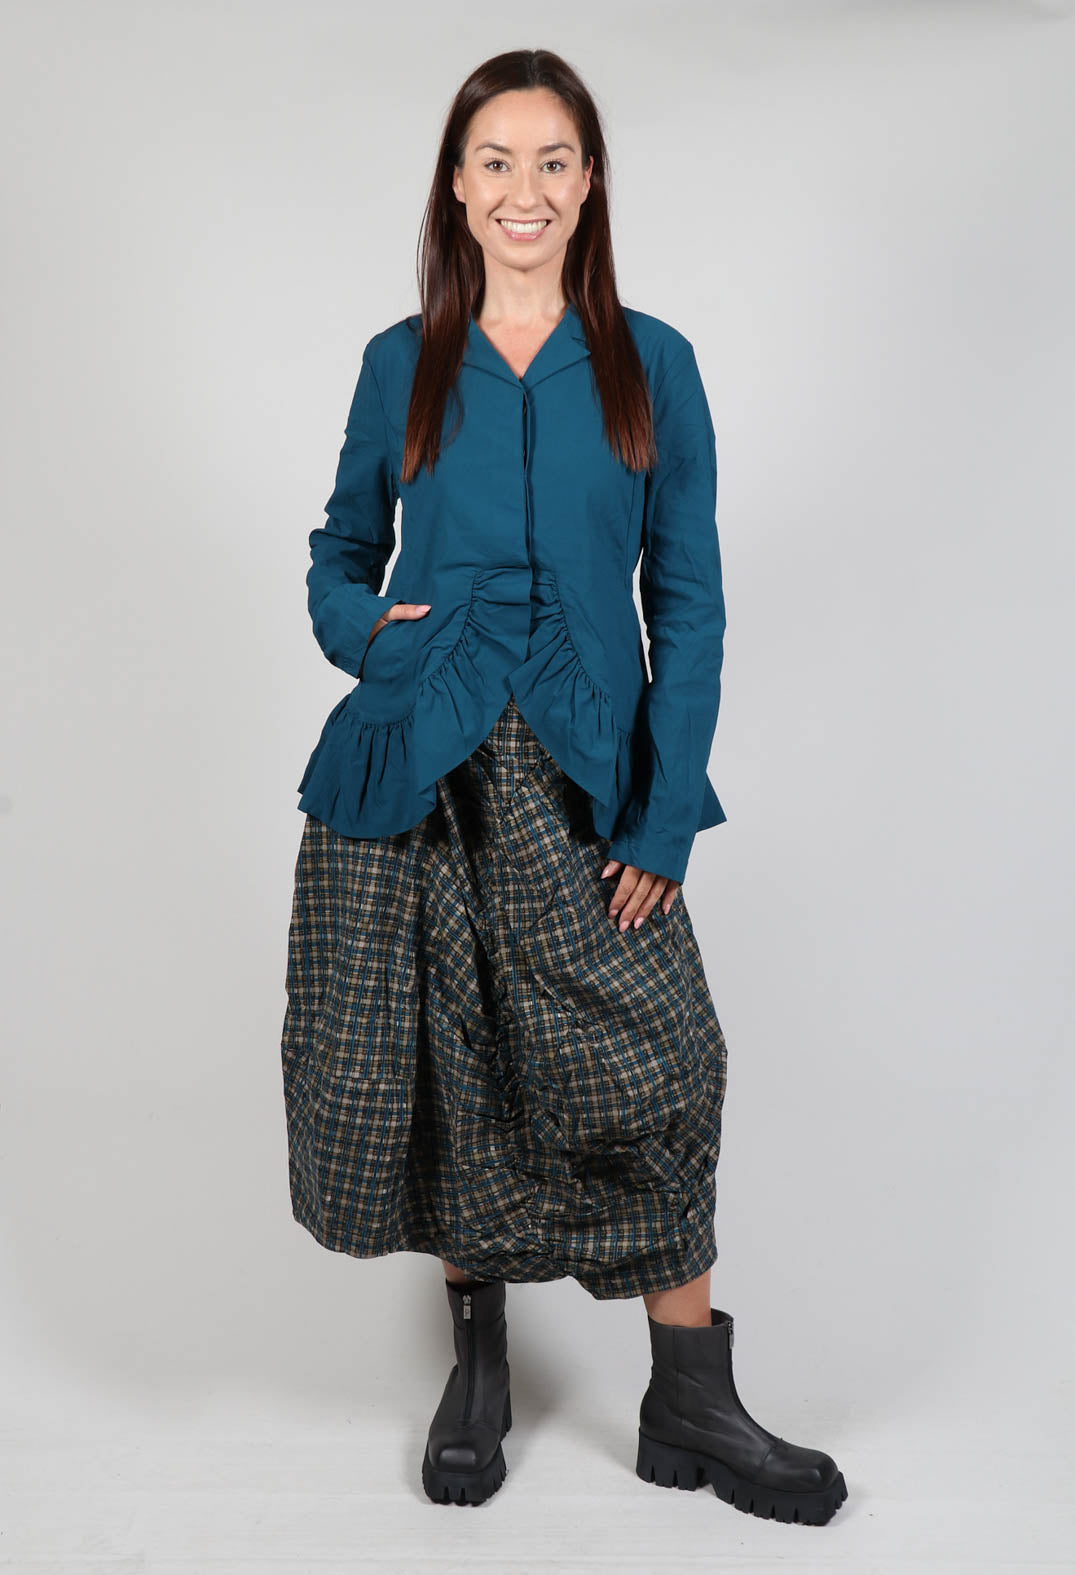 Tailored Jacket with Peplum Hem in Ink